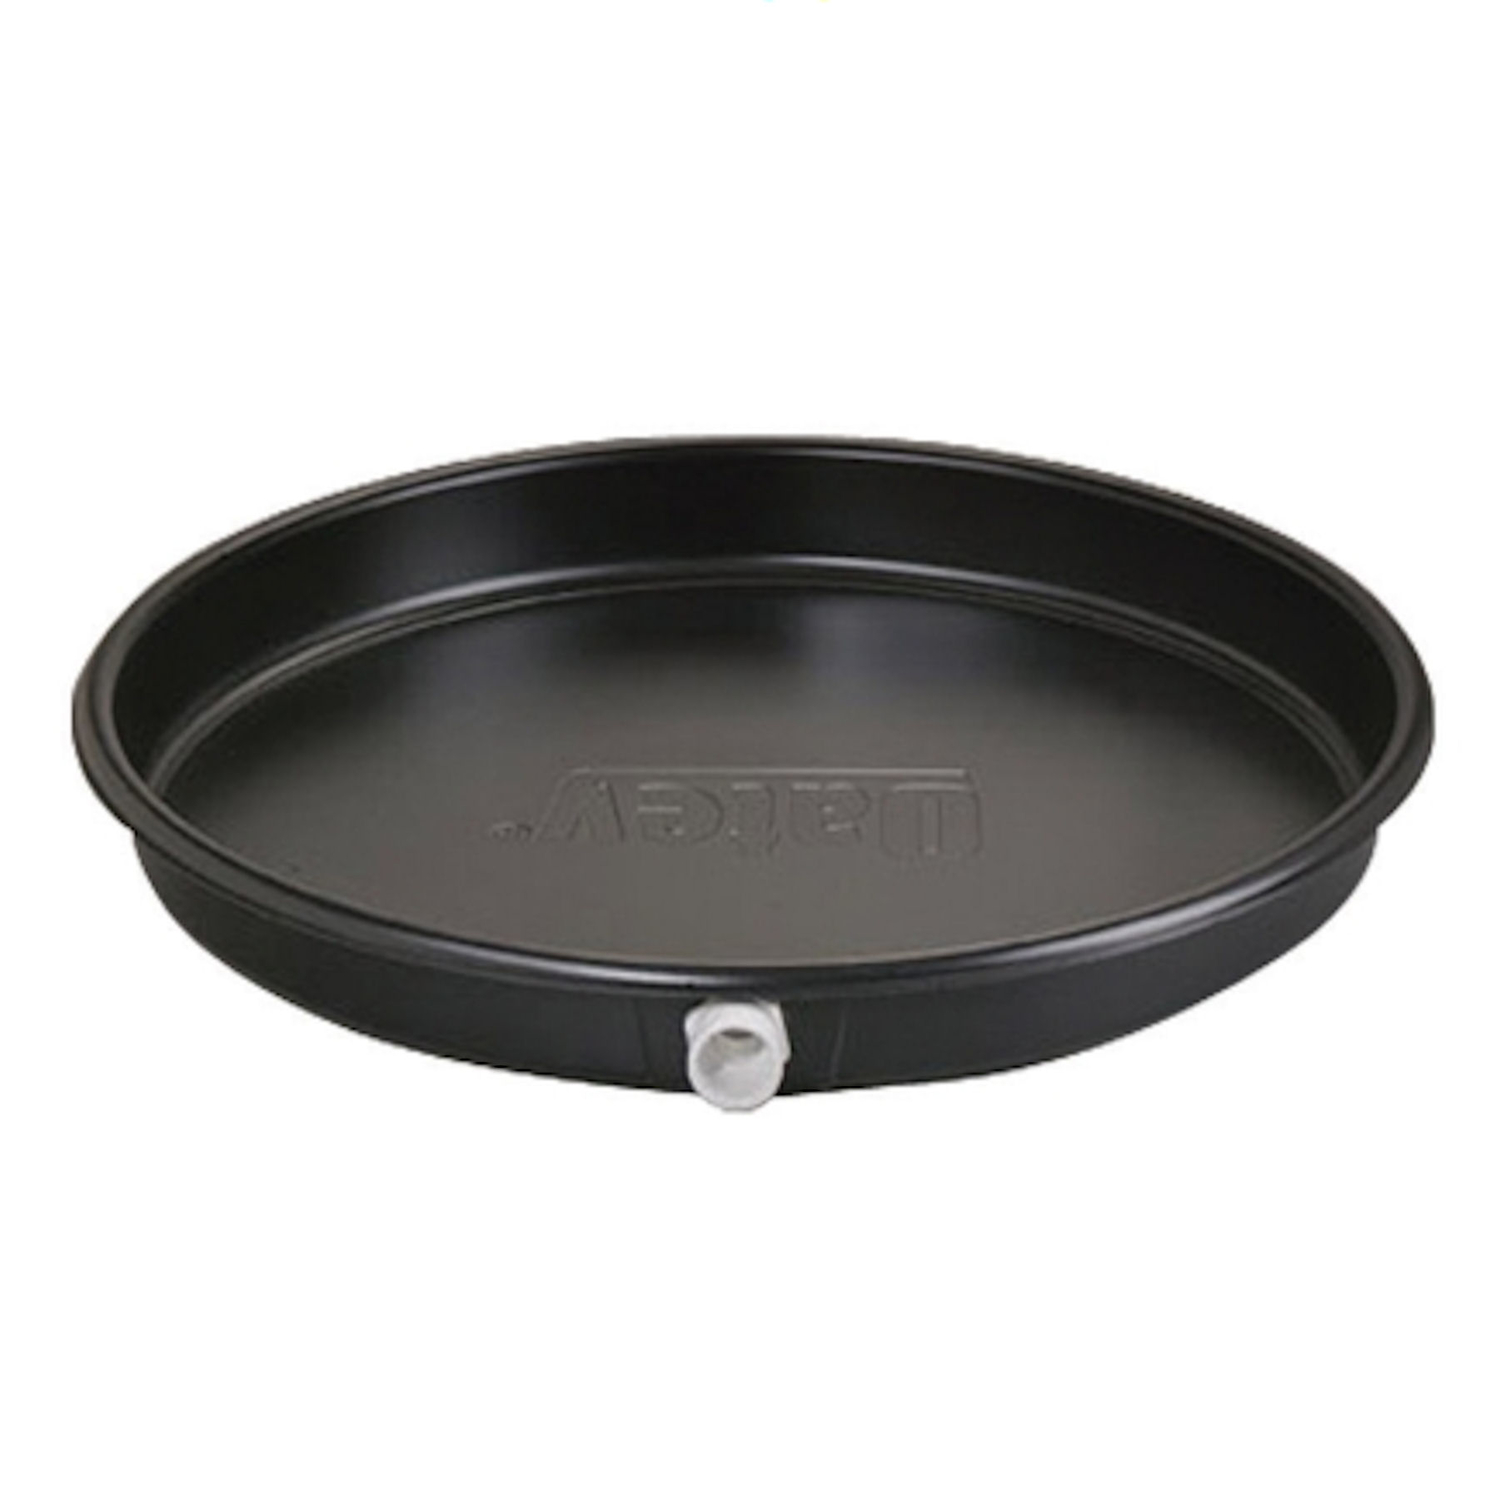 UPC 038753341583 product image for Oatey Plastic Water Heater Pan | upcitemdb.com